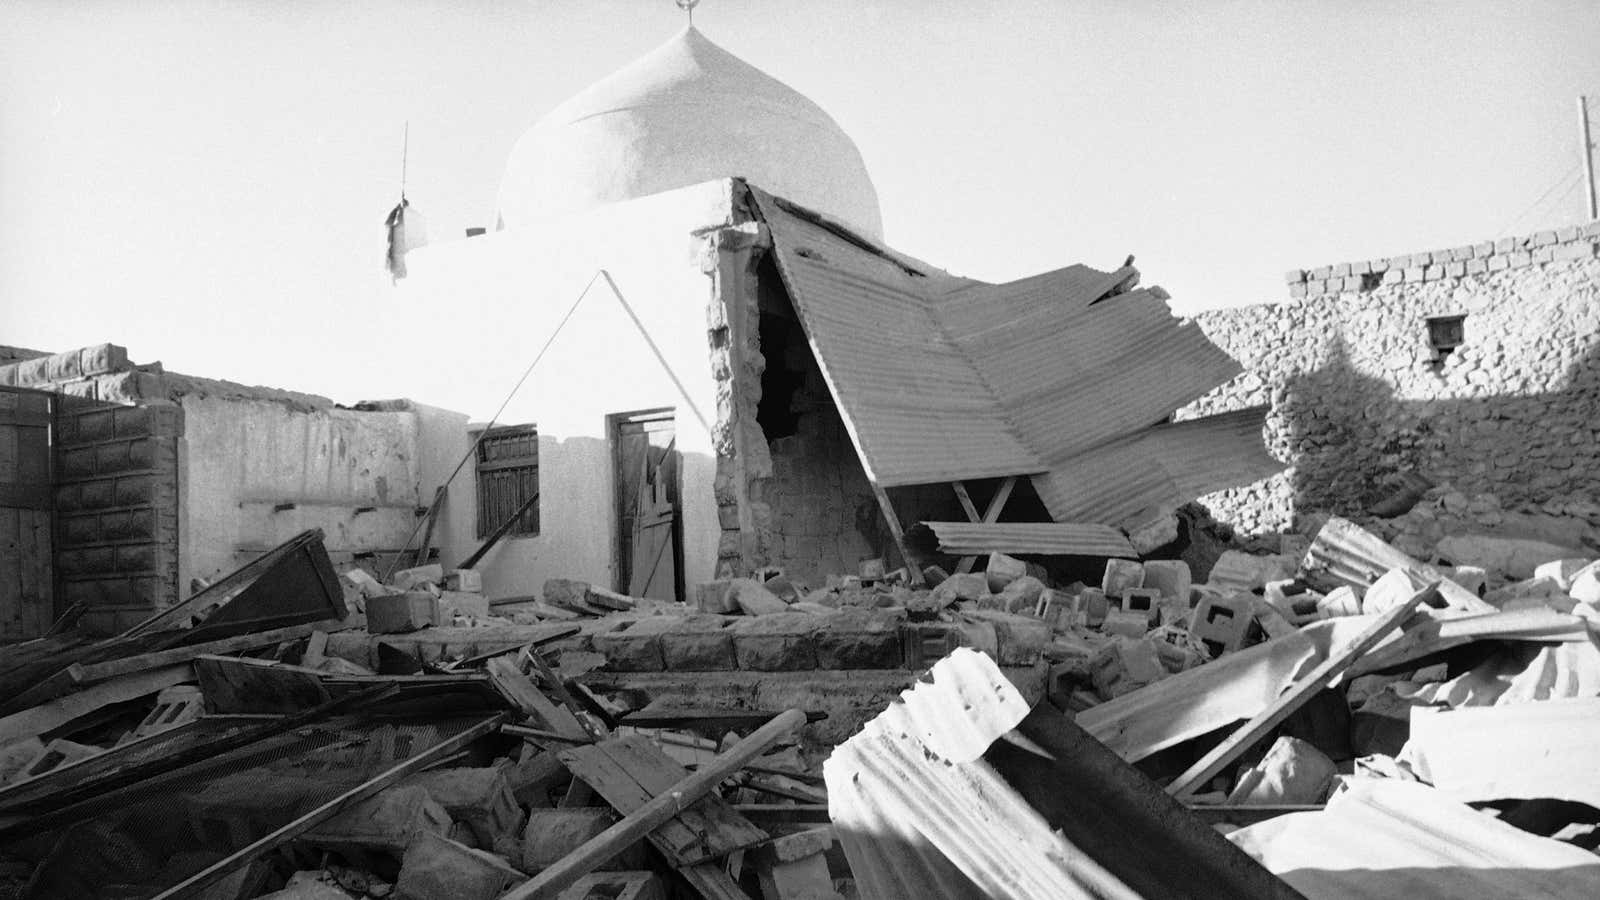 A destroyed school building in Hargeisa, northwestern Somalia in February 1978, following bombings by Ethiopian warplanes during the Ogaden War.